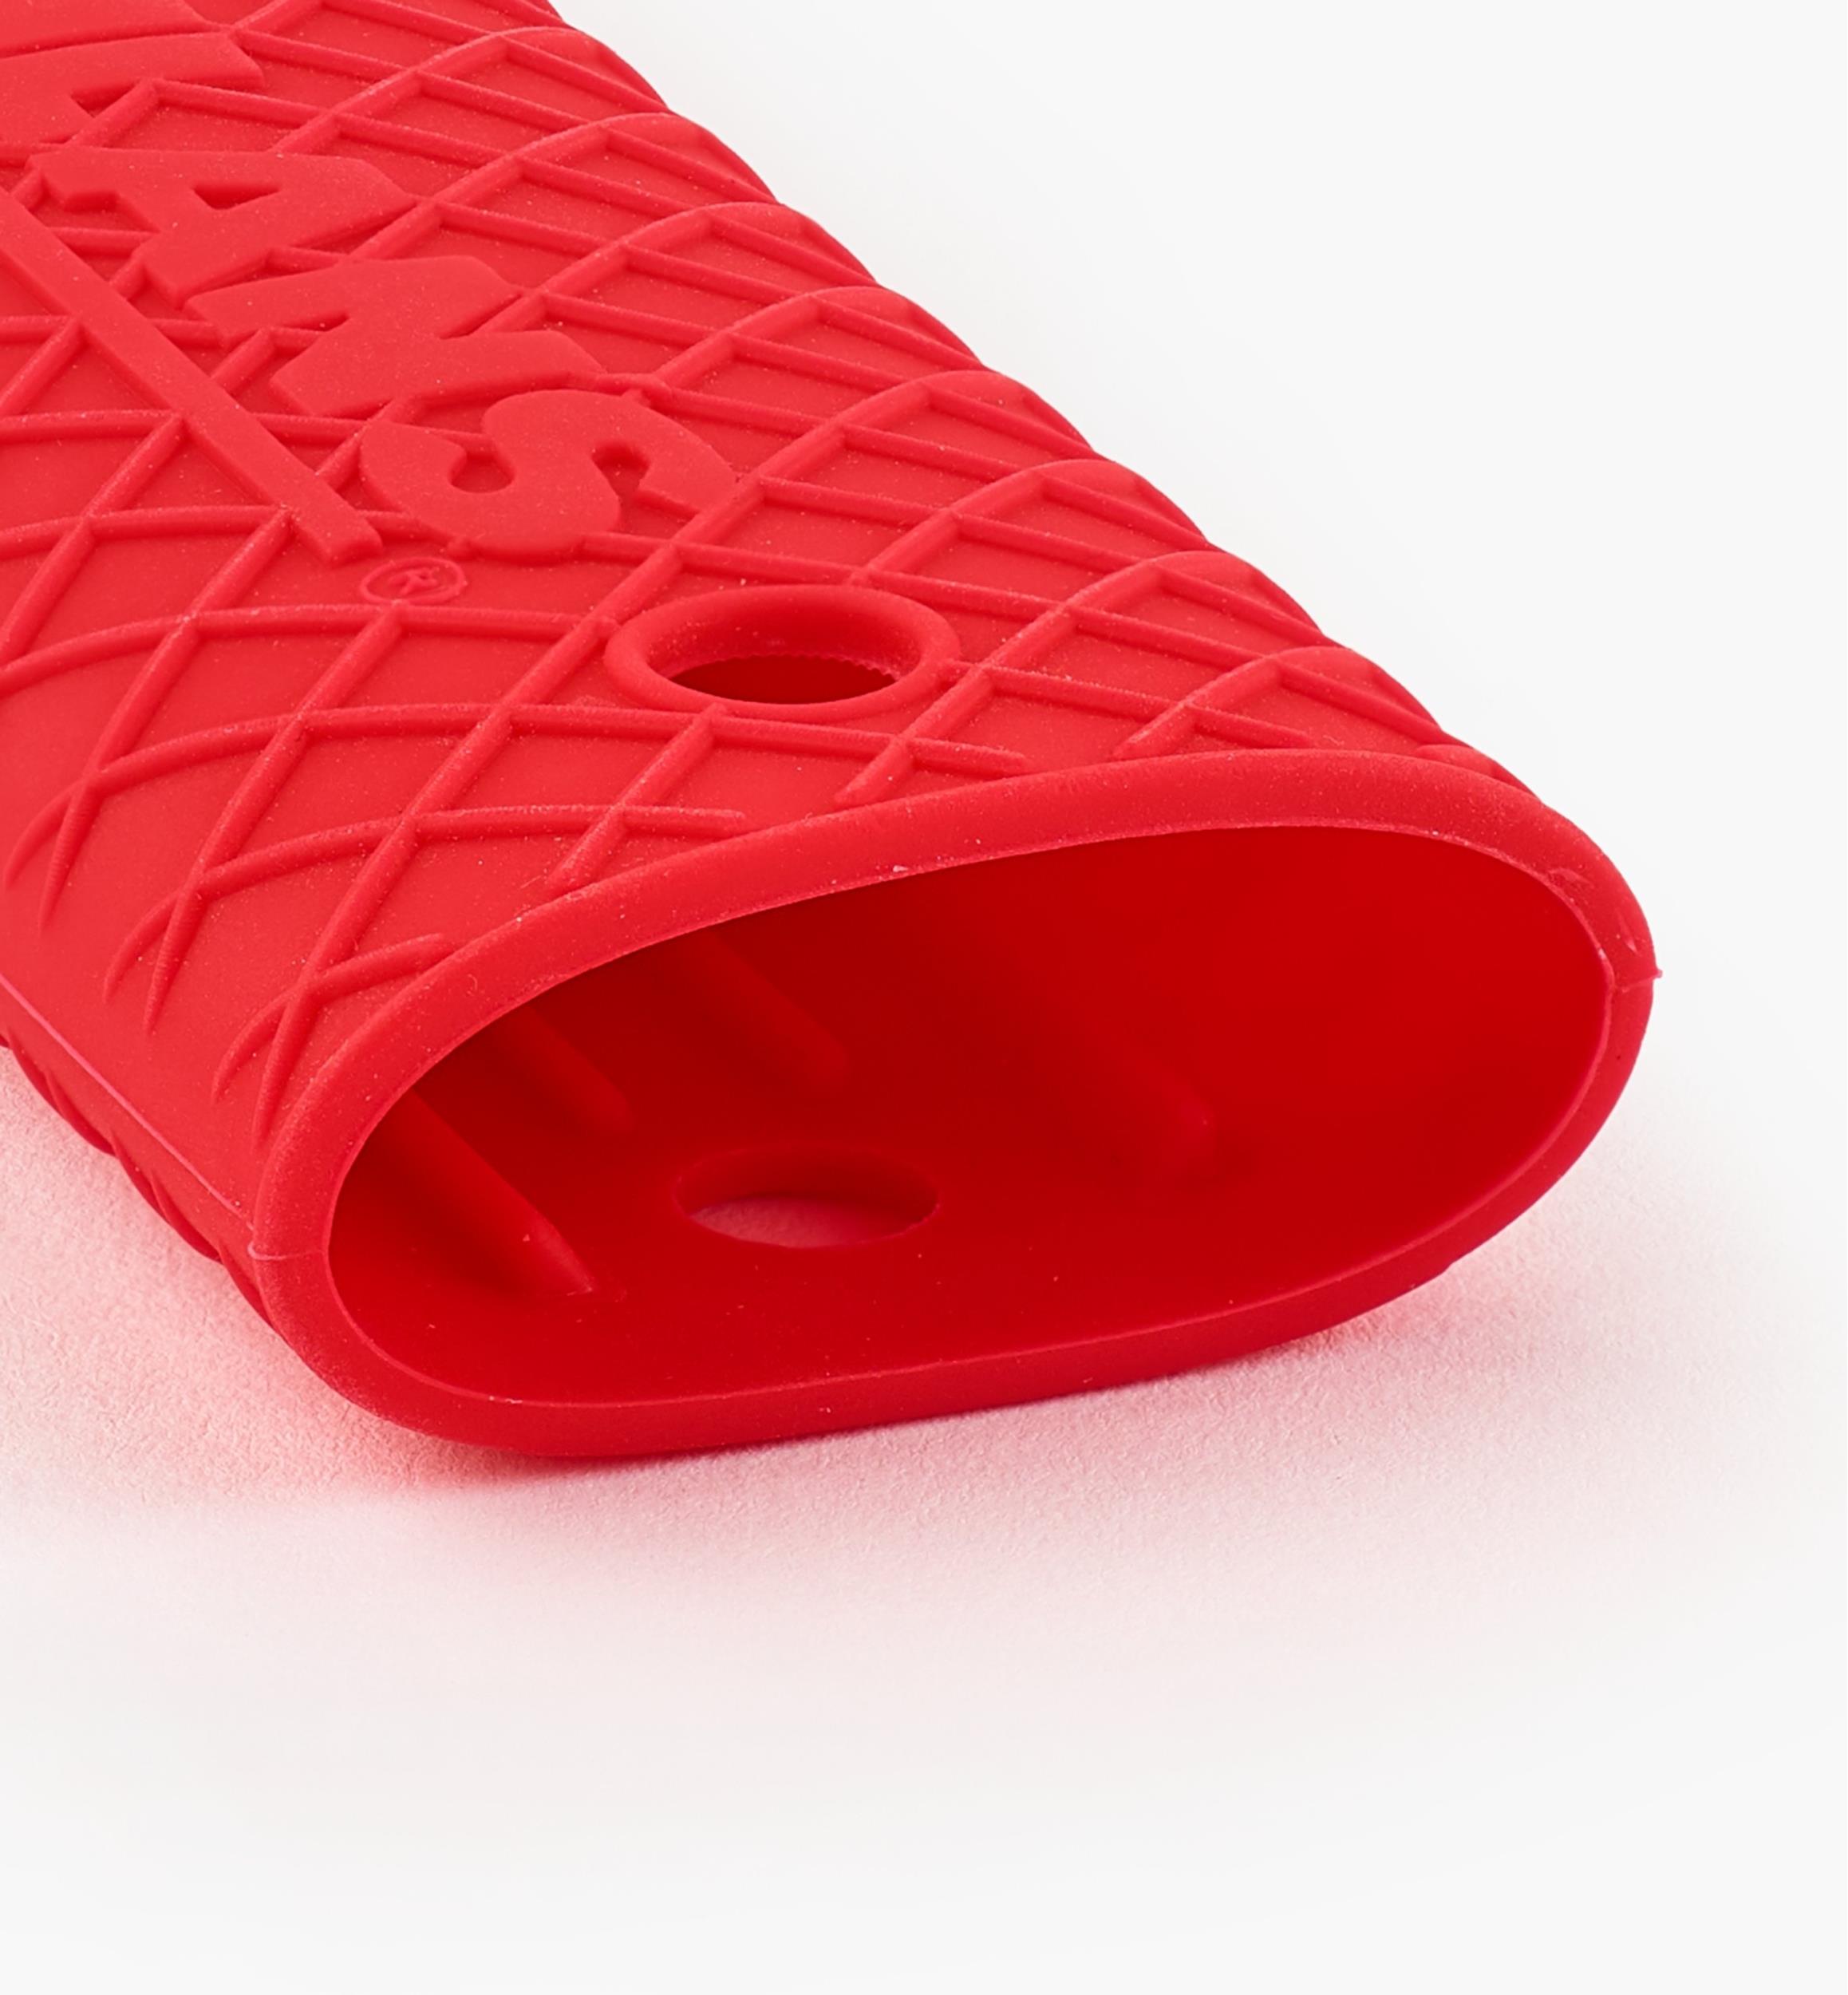 Silicone Handle Grip 